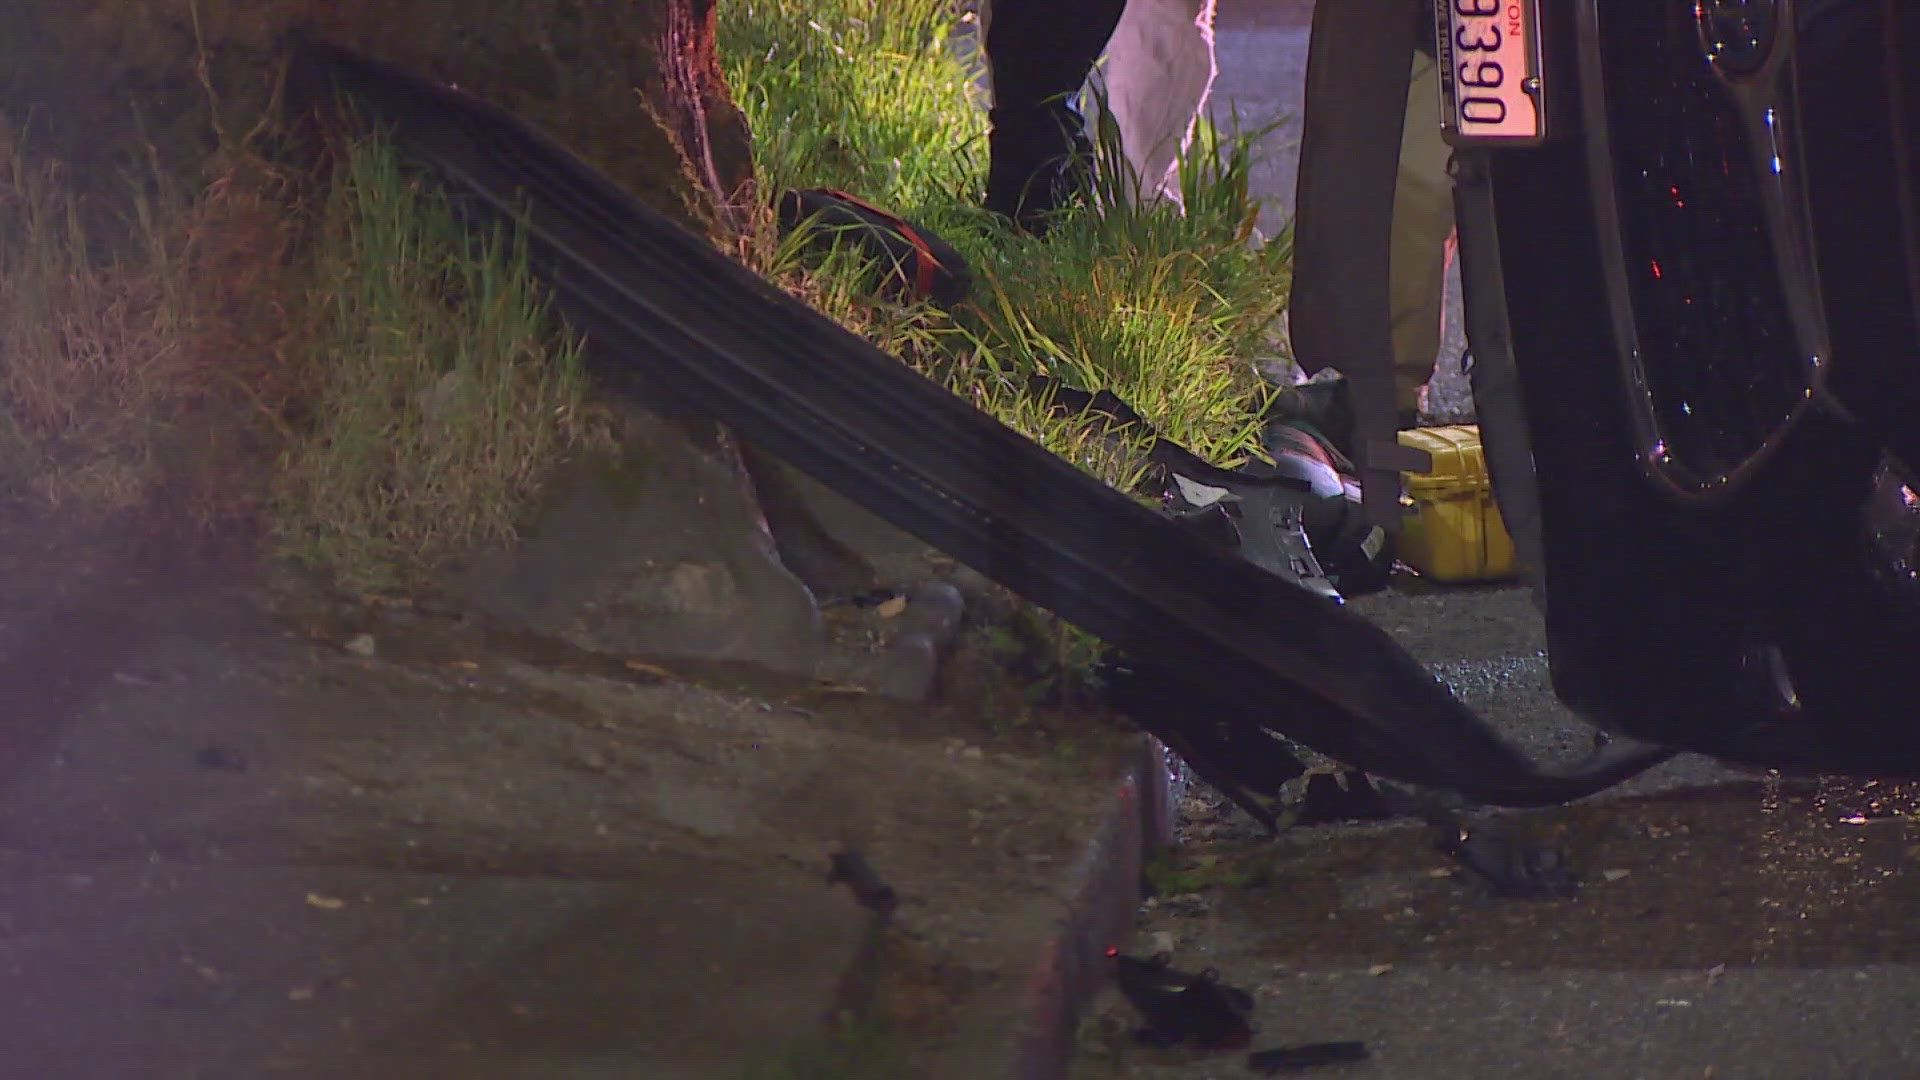 An SUV hit a tree and flipped, blocking Rainier Ave in Seattle's Beacon Hill neighborhood